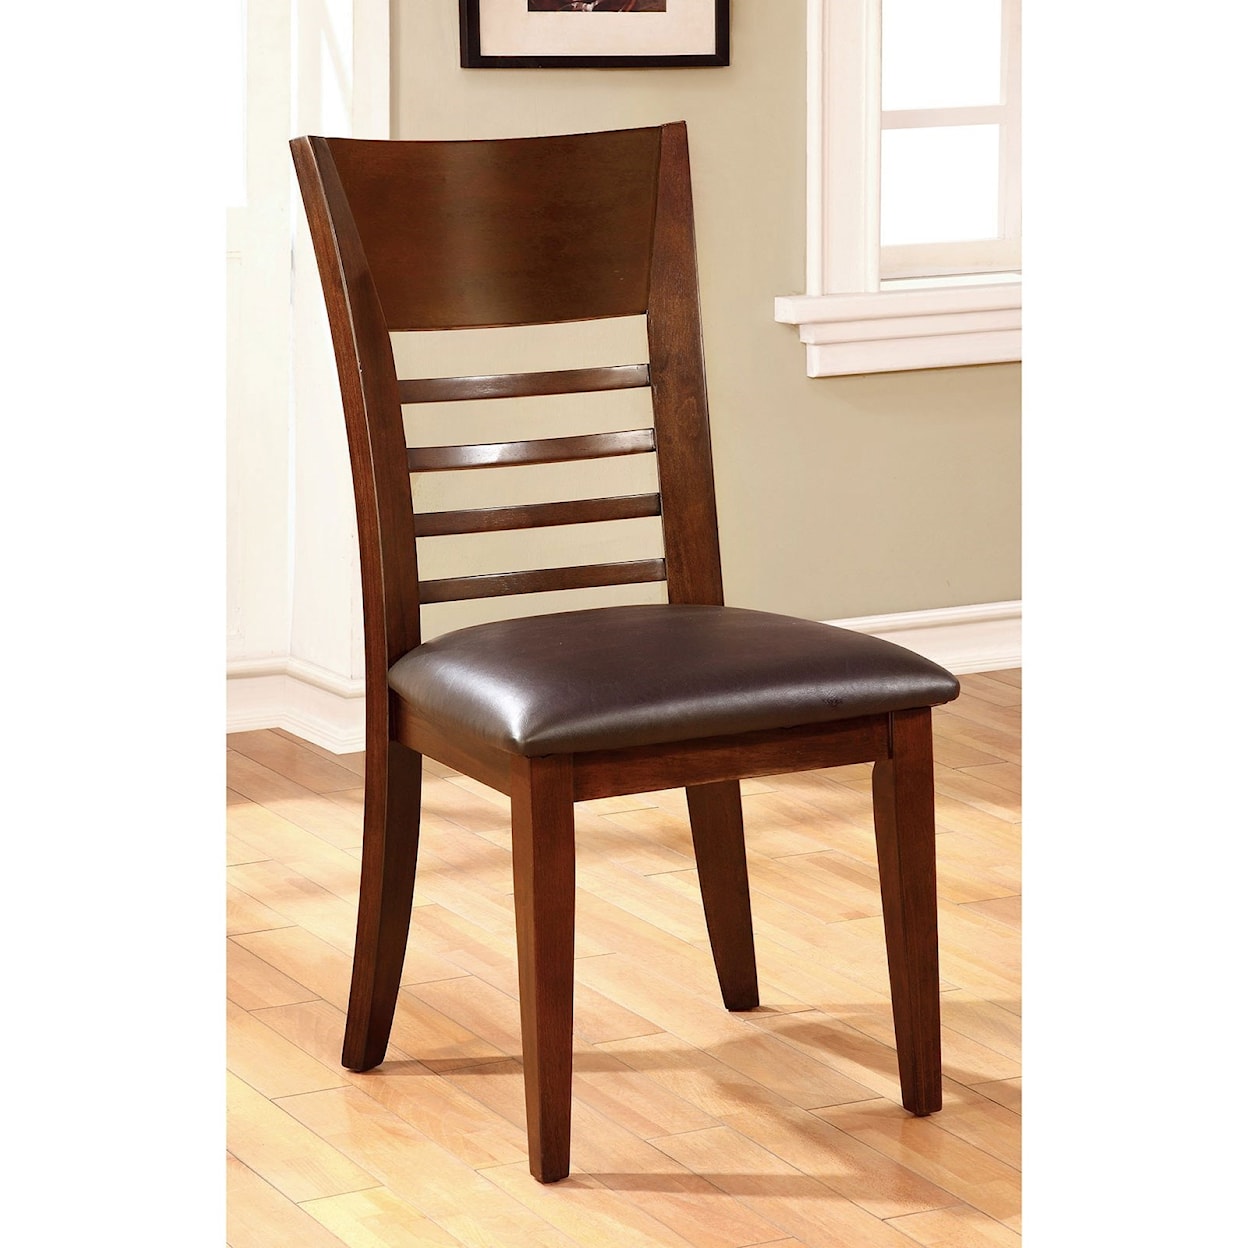 FUSA Hillsview Set of 2 Side Chairs